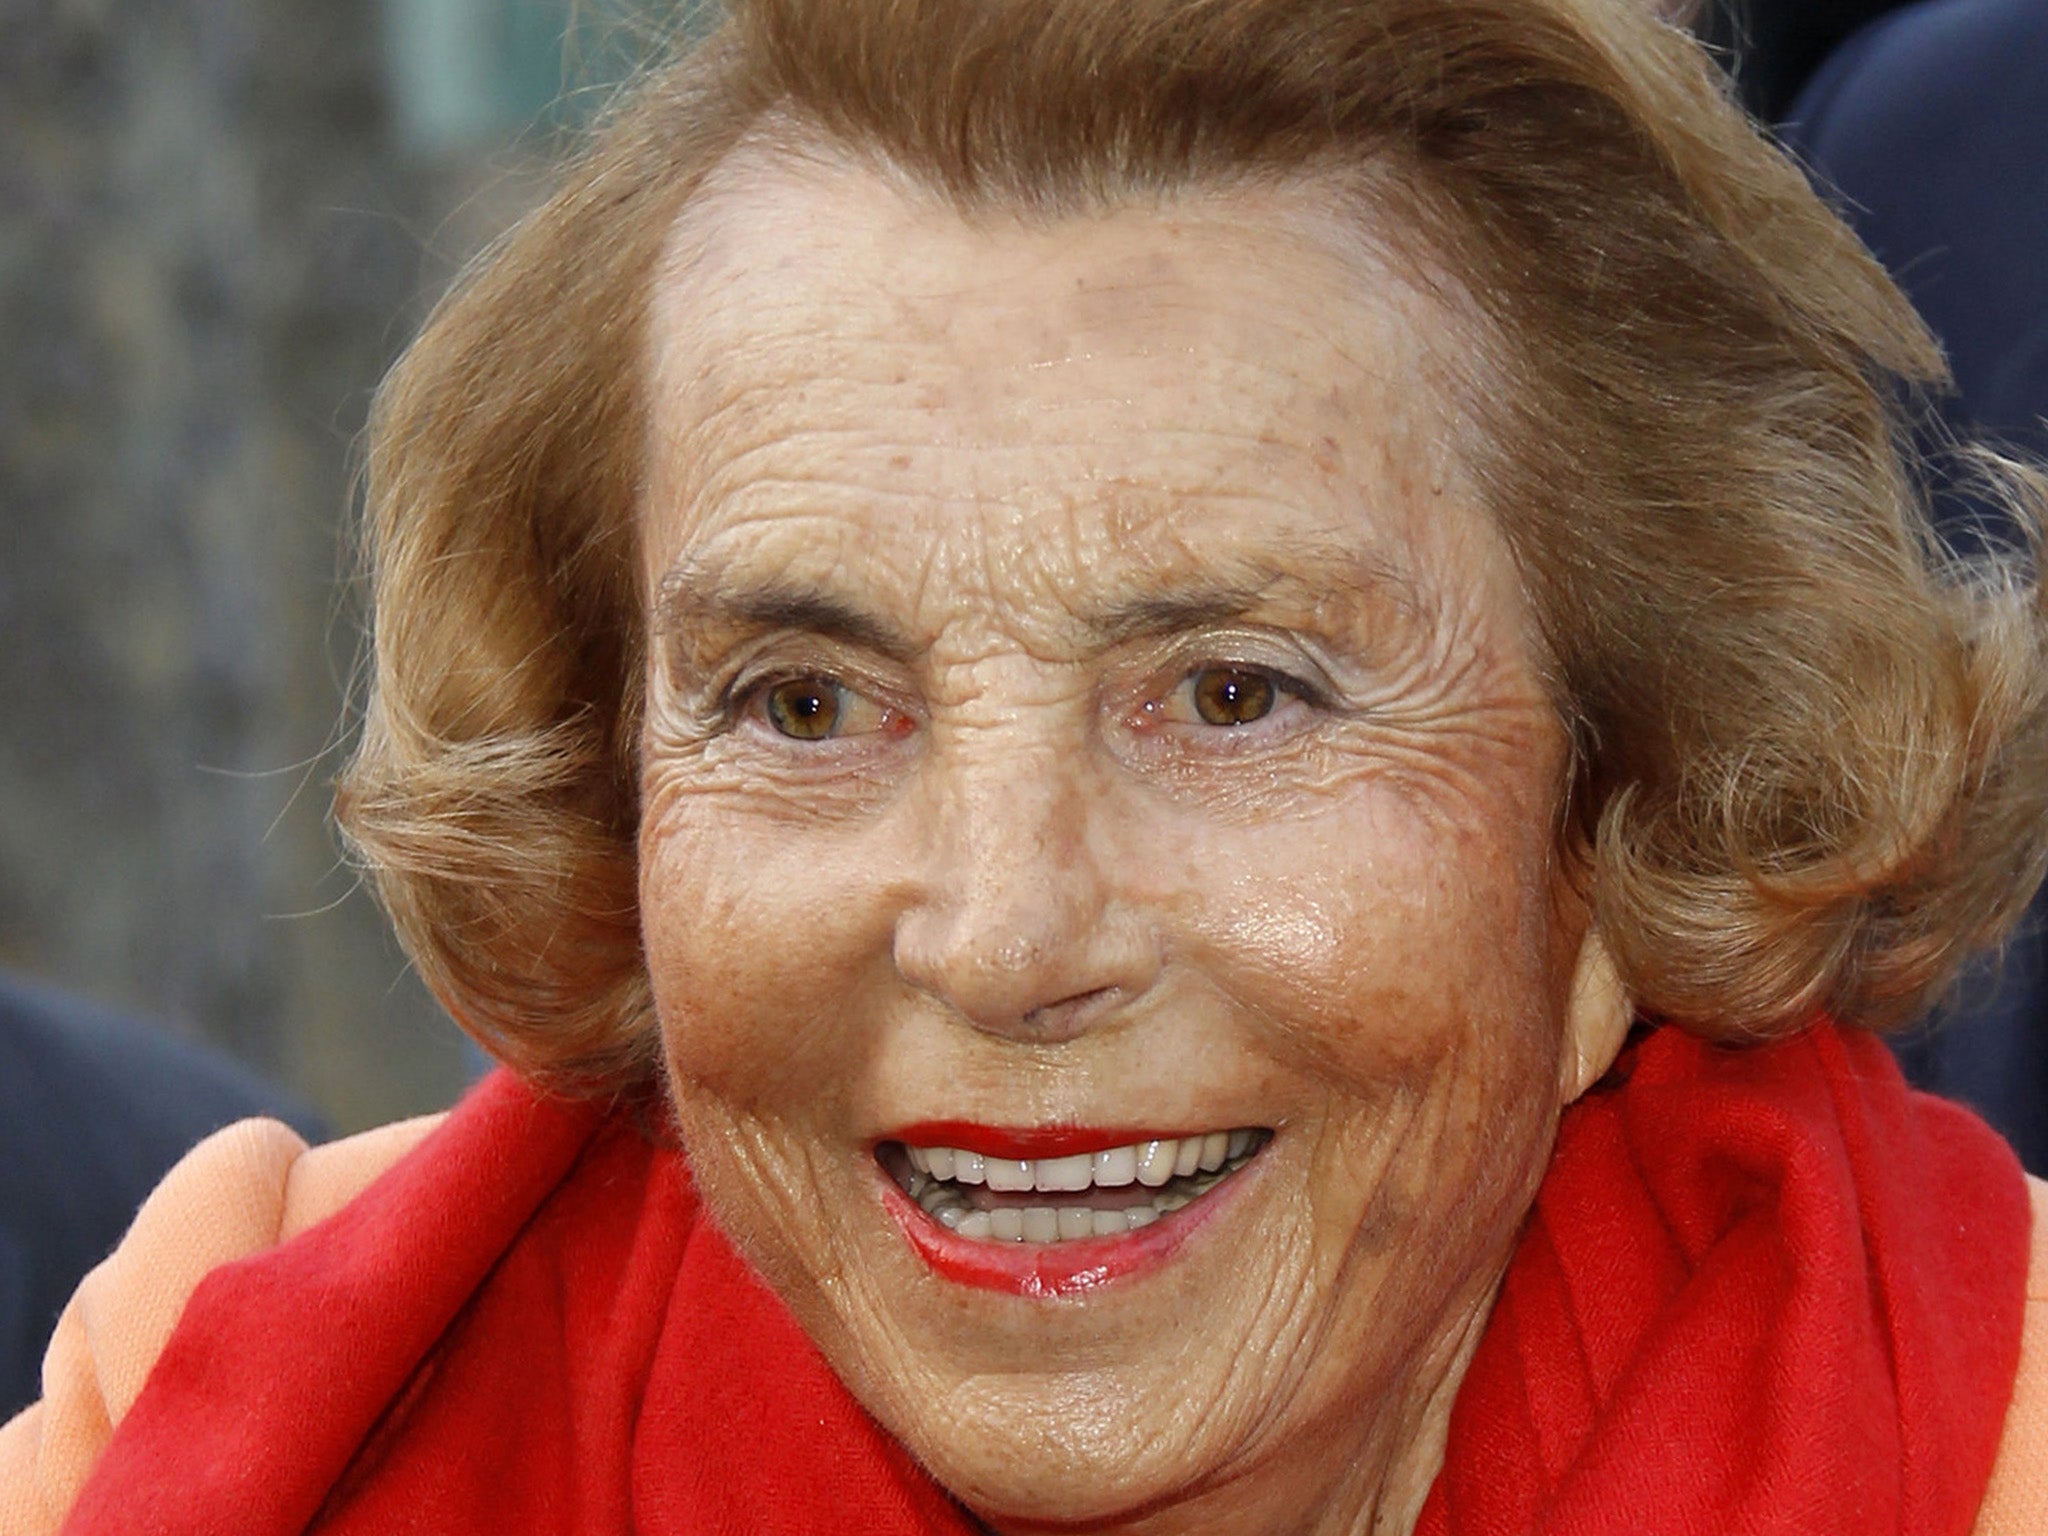 L'Oreal heiress Liliane Bettencourt has died at the age of 94